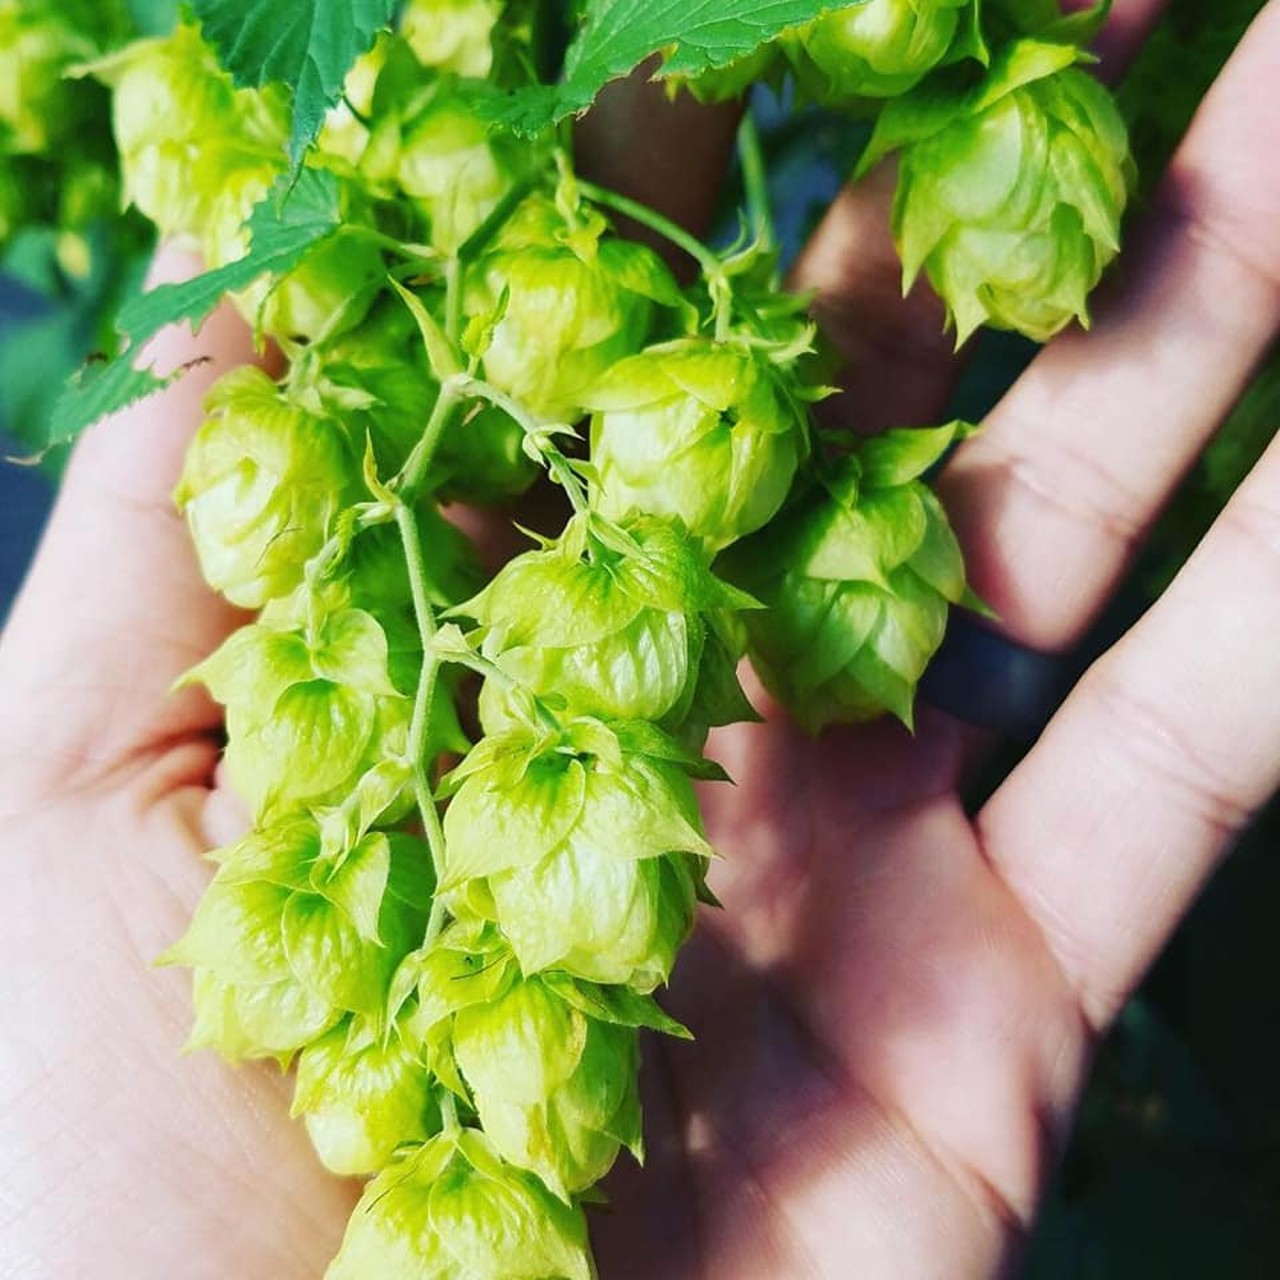 Visit Twin Bays hop farms in St. PeteThe hops will probs be flowering too, according to the TBBW web site.Wed., Mar. 6, 9 a.m.-4 p.m.
Photo via the Facebook event page